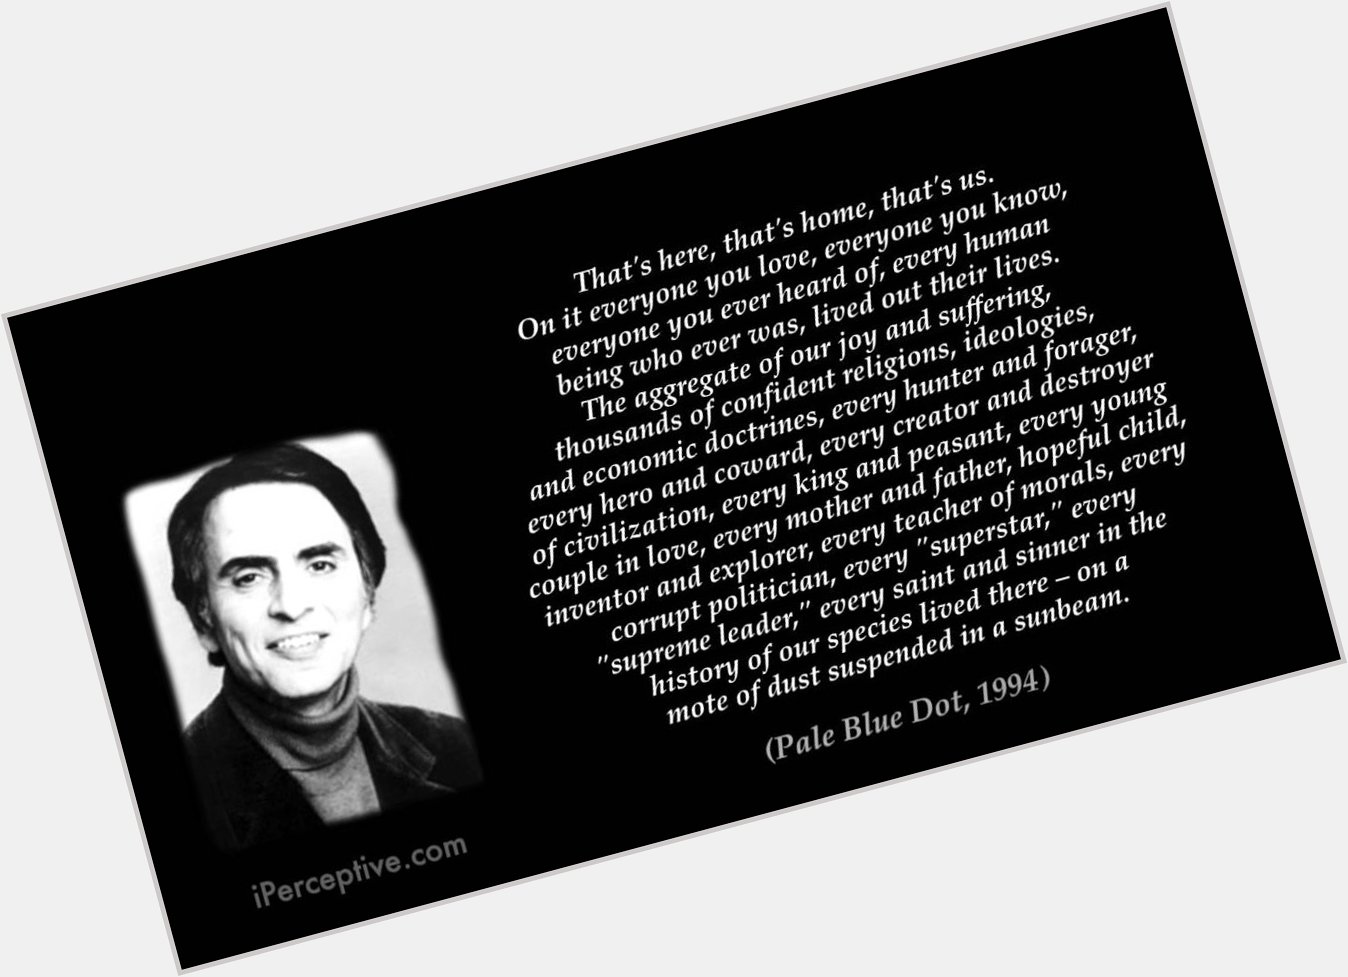 And Happy Birthday to the man who fired a love of discovery in so many of us, Carl Sagan!  